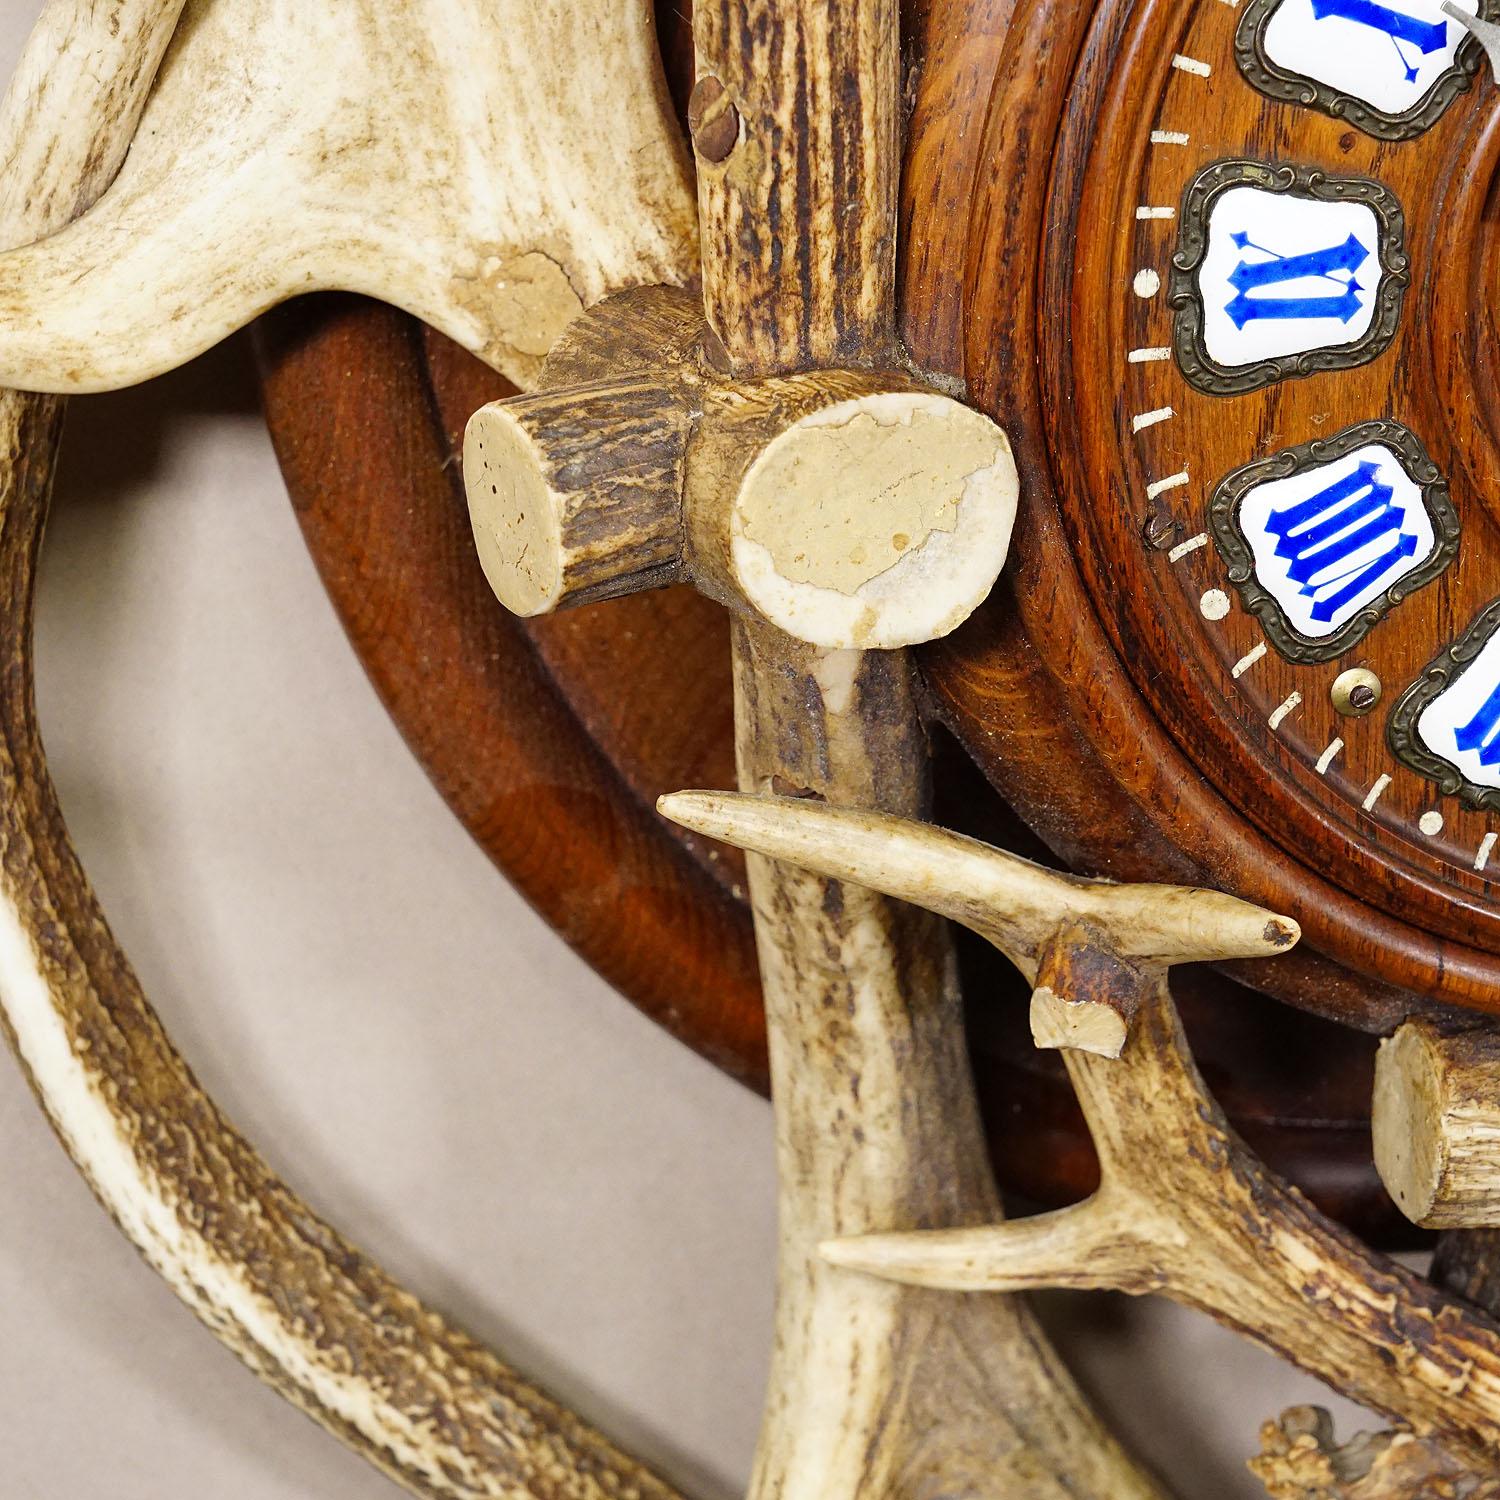 Antique Cabin Antler Wall Clock with Deer Head Austria ca. 1900 For Sale 1